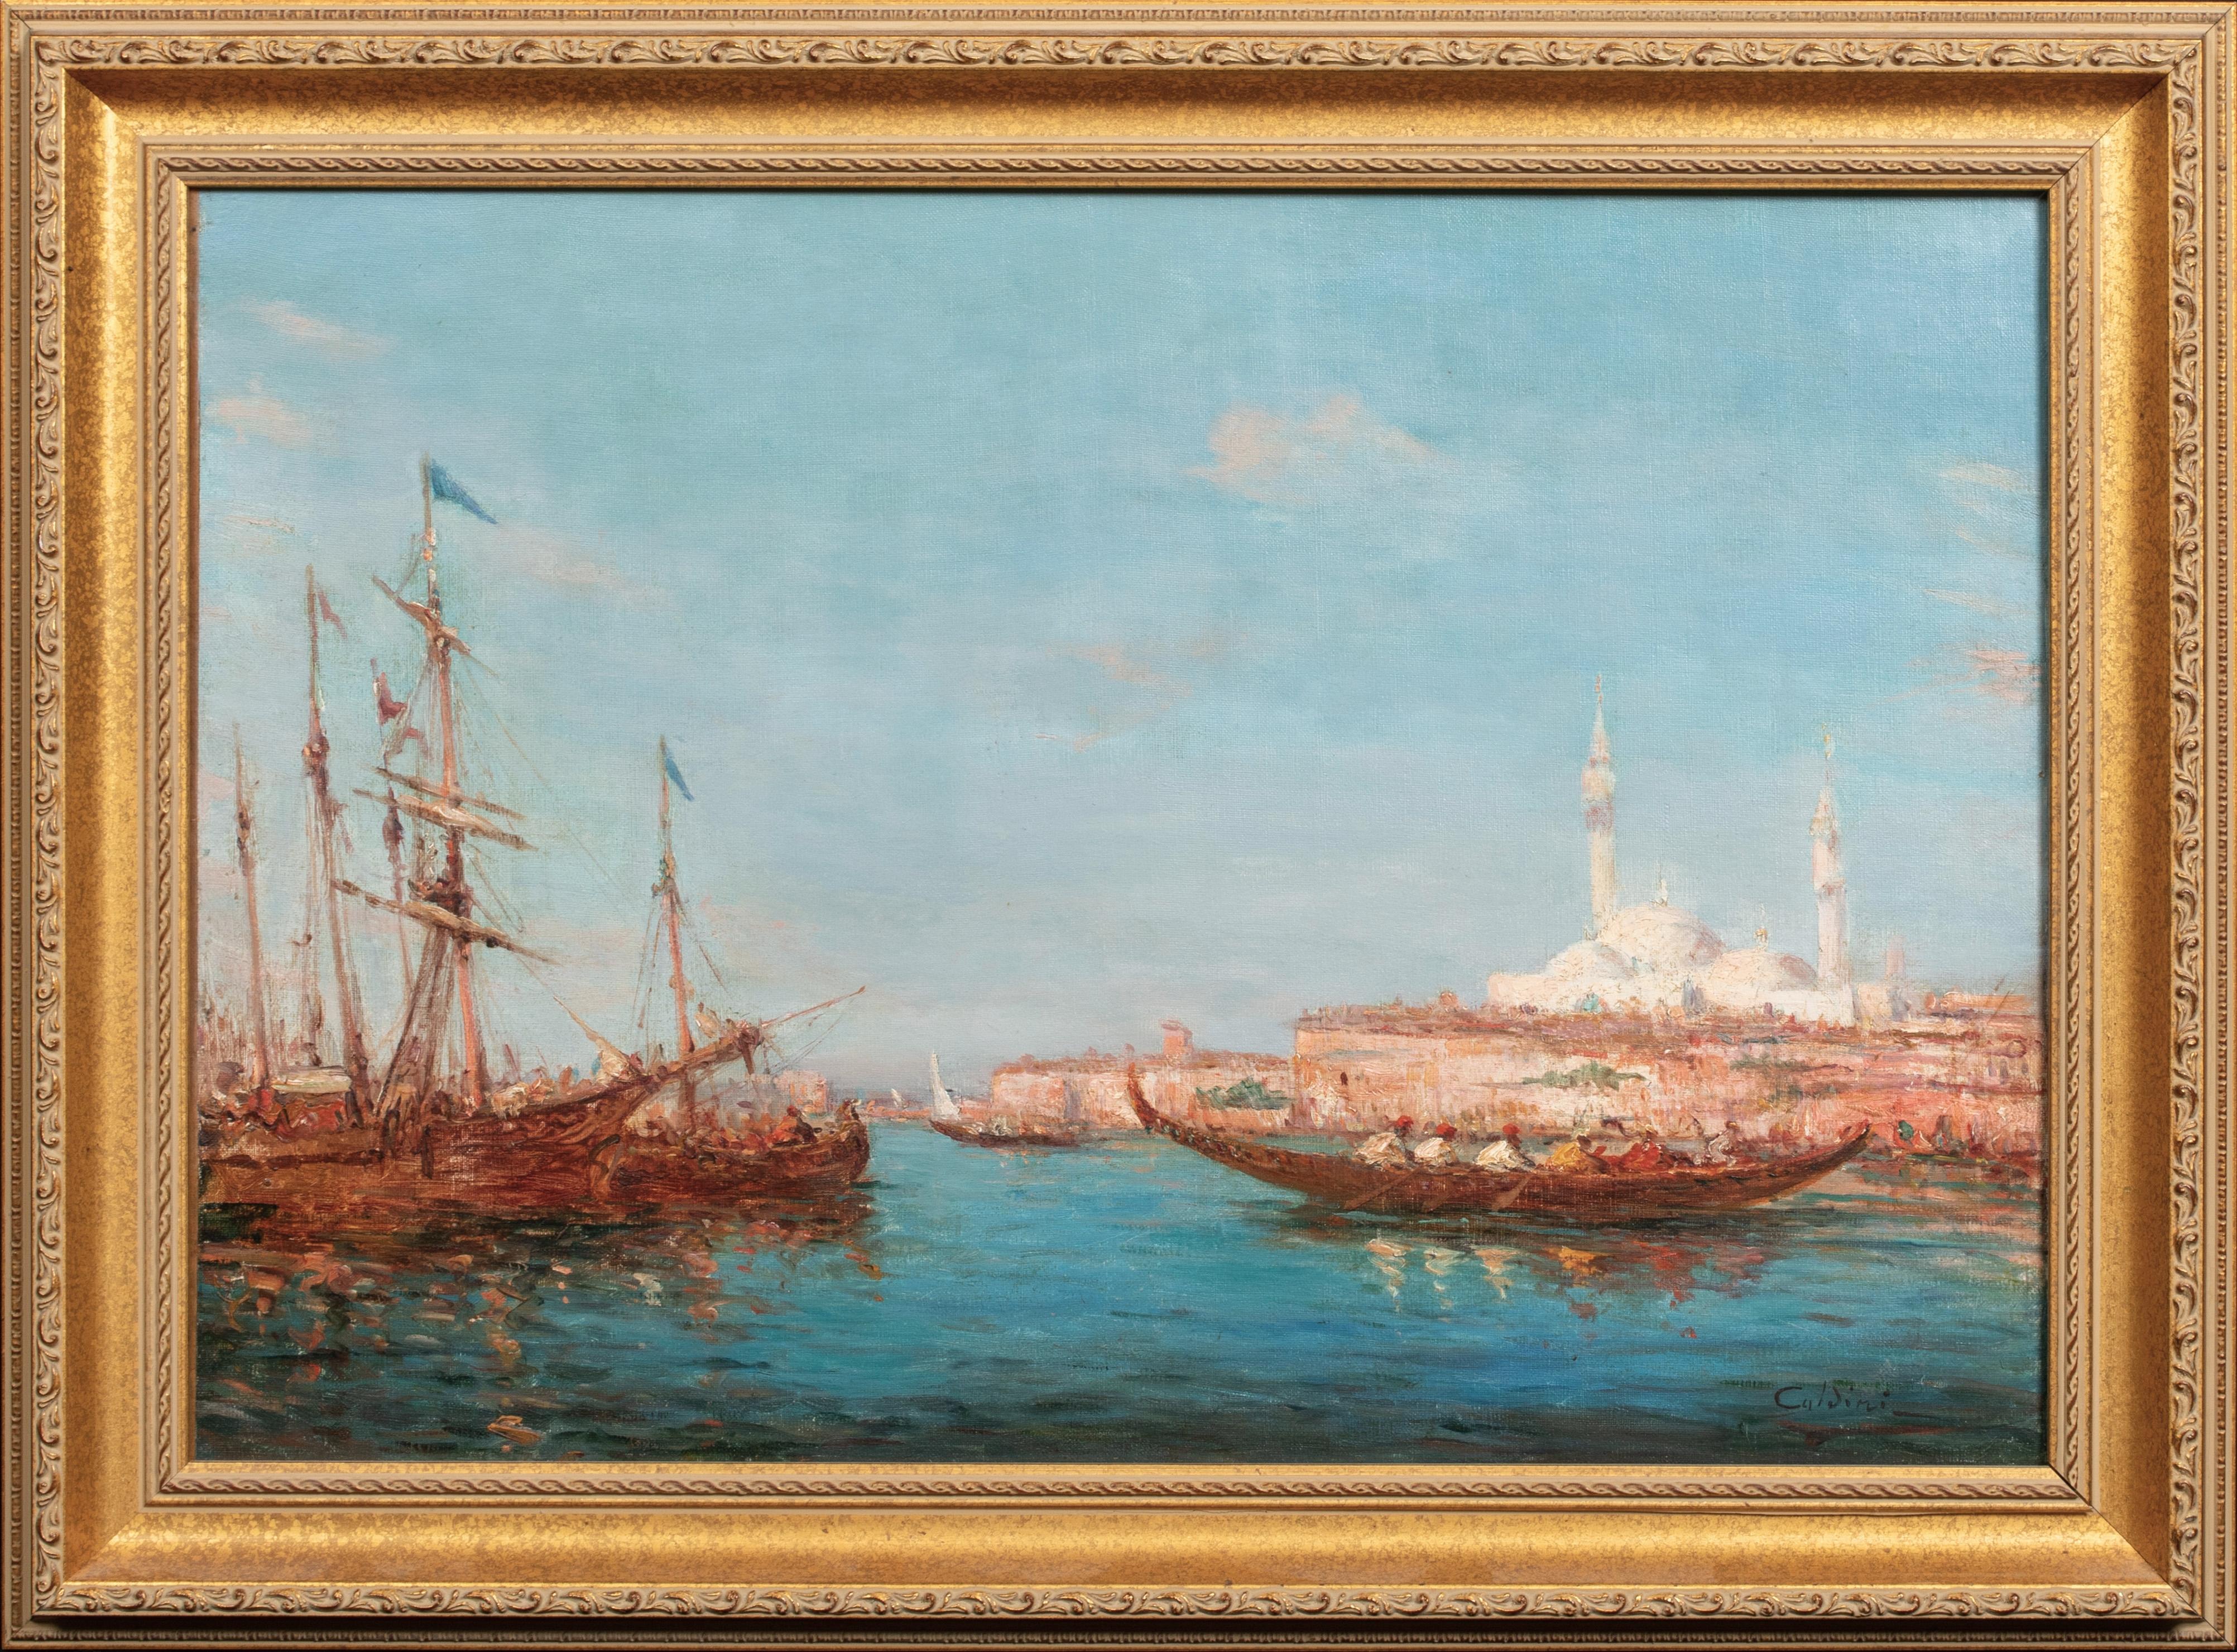 Unknown Landscape Painting - View of Bosphorus, near Istanbul, 19th Century  Signed Indistinctly - Italian